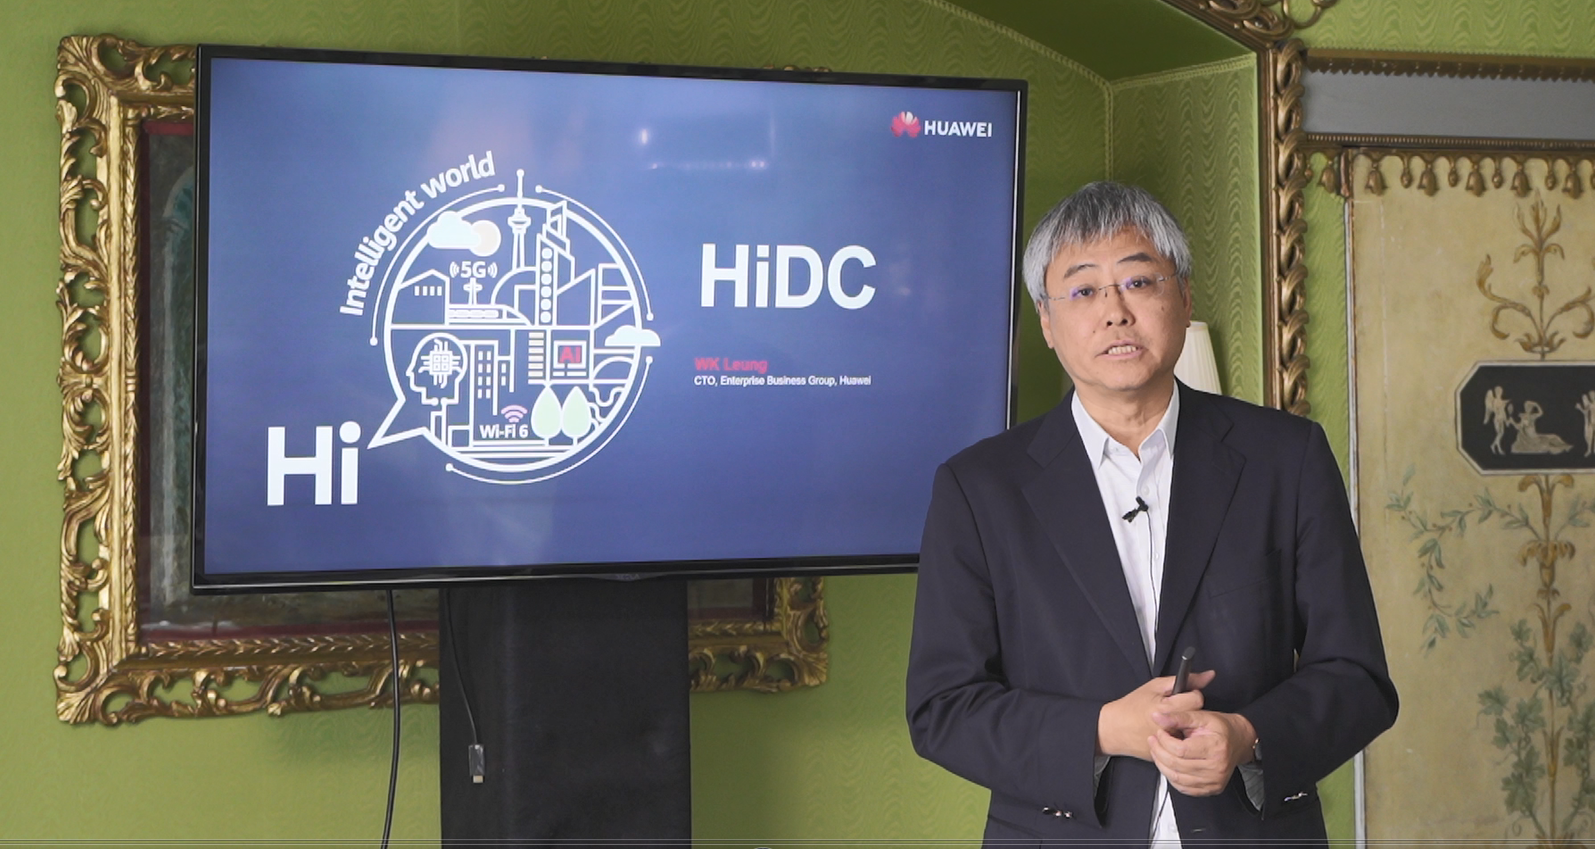 Wing Kin Leung, CTO of Huawei Enterprise BG, presents the HiDC solution remotely at the Industrial DX Conference 2020